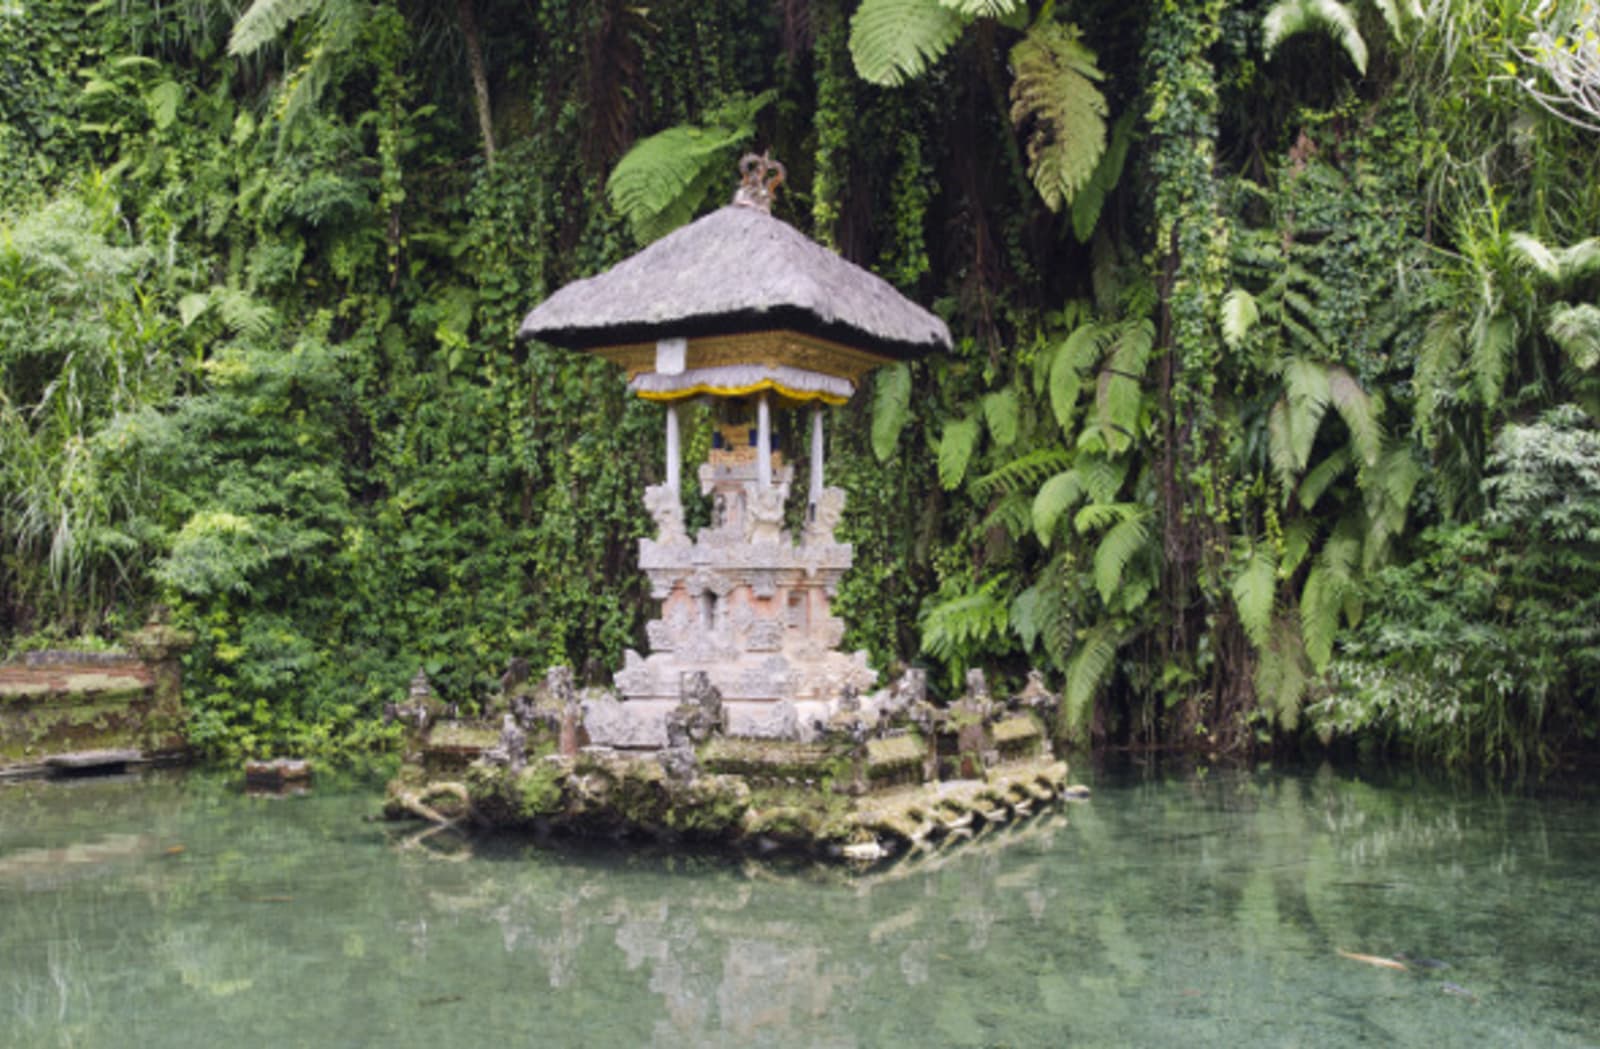 Small pagoda temple in a platform in a river, with jungle surrounding